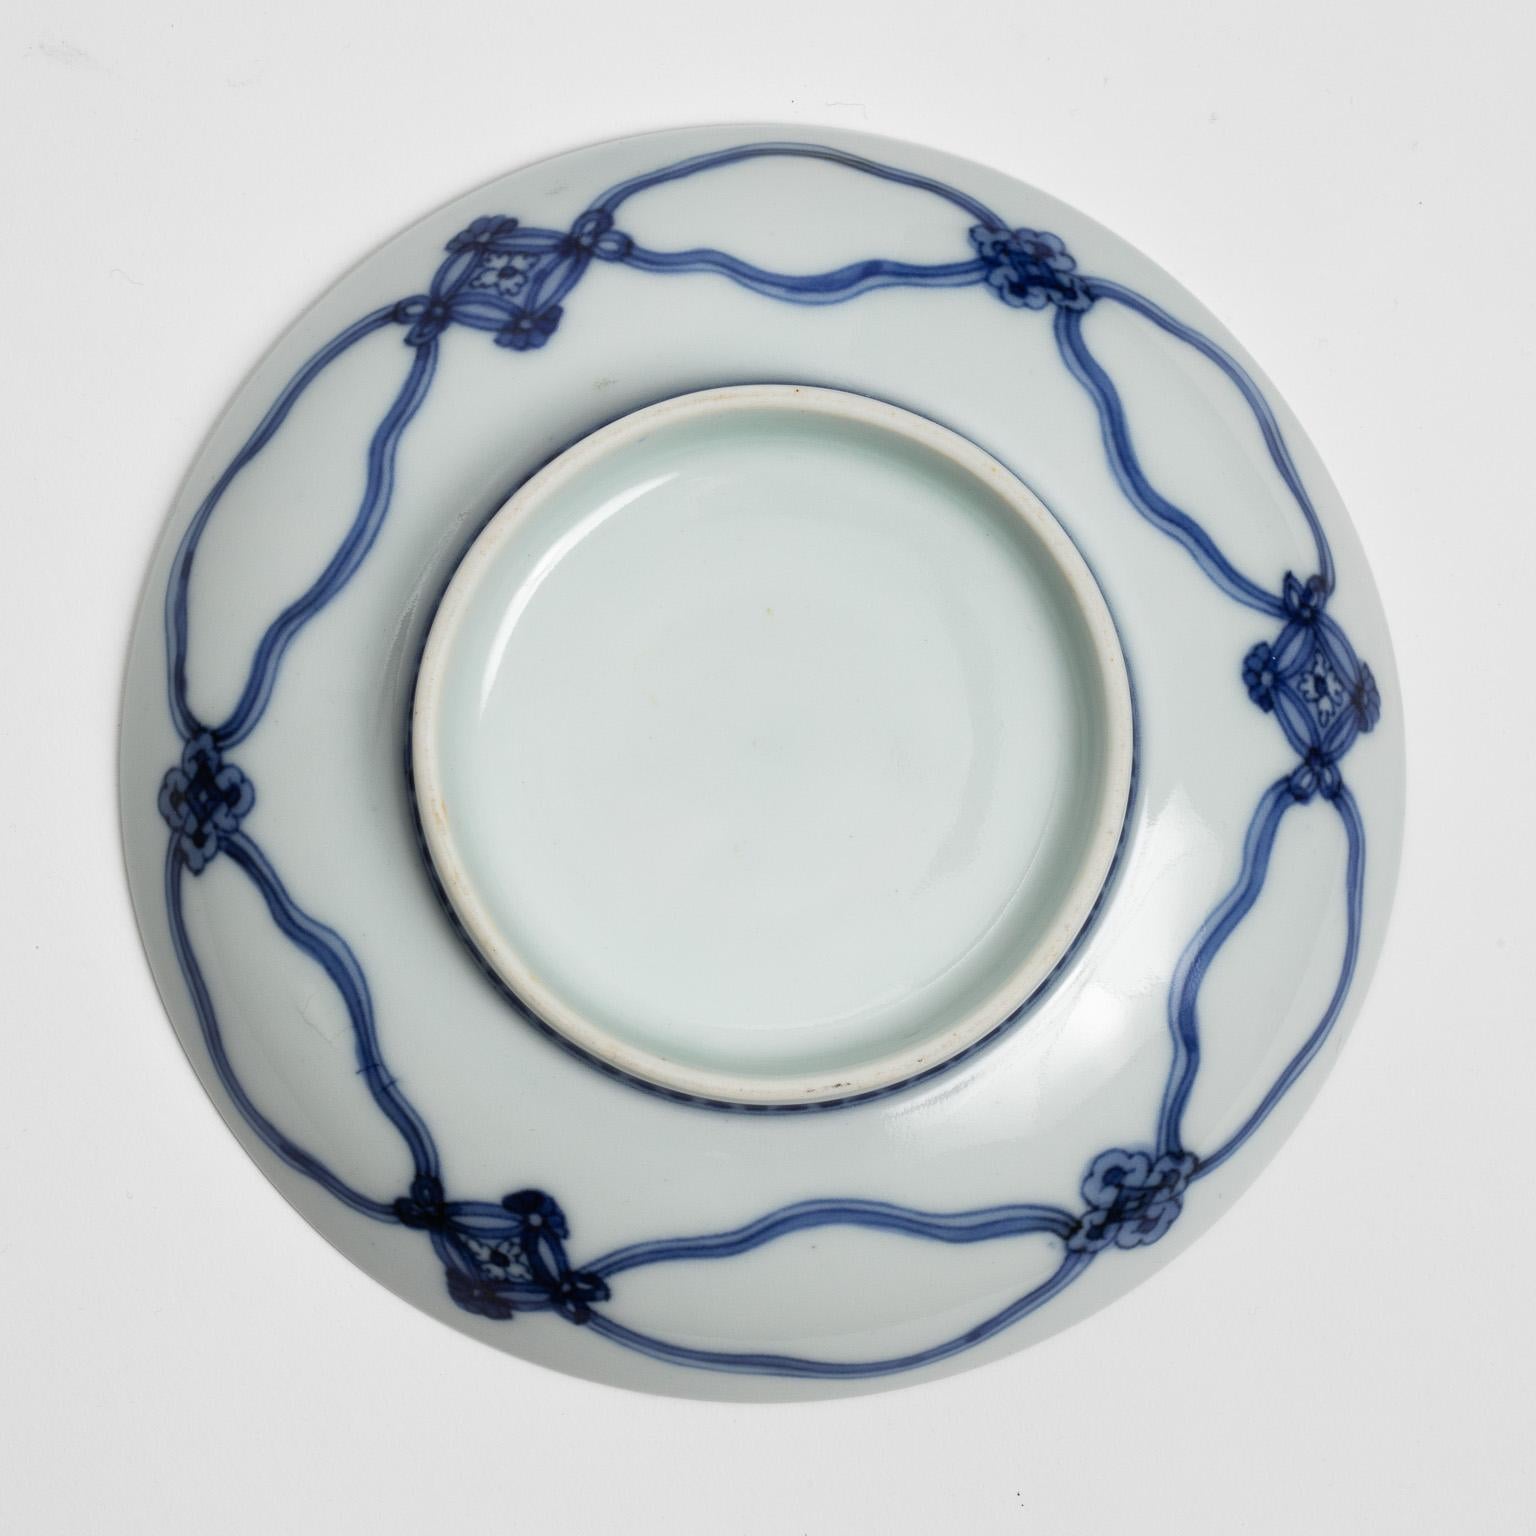 Dish with karatuuri (melon) design

Late 17th-early 18th century

Porcelain decorated with cobalt blu underglaze and red fruits 

Diameter 15.2 cm

Nabeshima ware was made at Okawachi near Arita in Kyushu under the authority of the Nabeshima